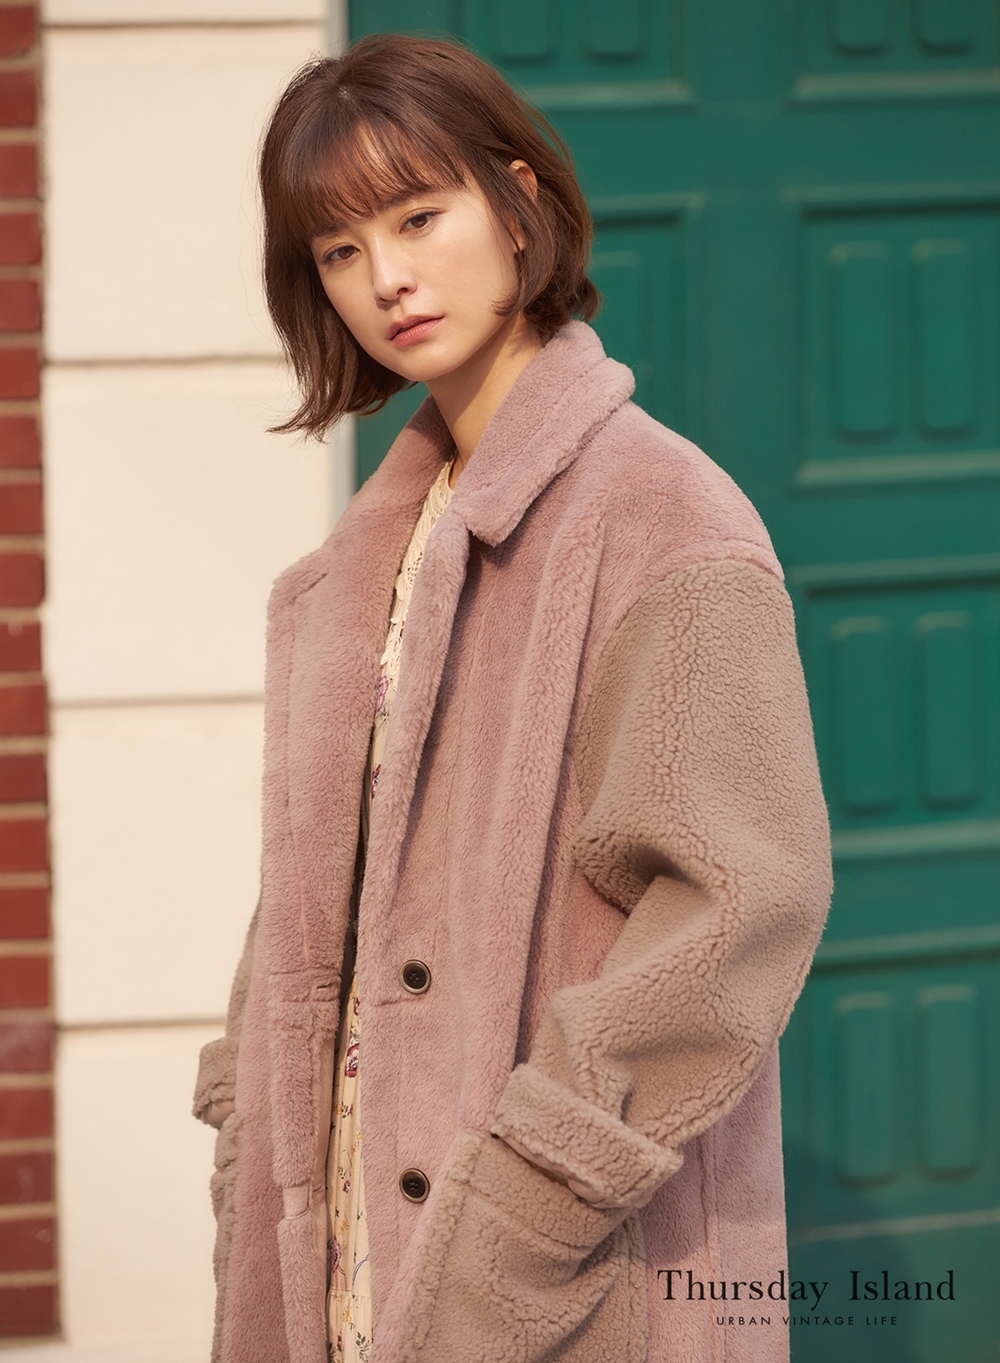 Actor Jung Yu-mi showed off her lovely charm.On the morning of September 12, Thursday Island (T.I.) released an additional photo cut with Muse Jung Yu-mi.Jung Yu-mi, who introduced various autumn and winter season styling in the picture, showed off his lovely charm with a lovely pose and expression in the middle of shooting while transforming into an atmosphere of autumn goddess.Especially, wearing a beret that matches the Supernatural hair, taking a playful pose or laughing naturally made the viewers feel excited.In addition, it shows the beauty of the brand Muse by perfectly digesting the soft beige coat and pink teddy bear coat in its own romantic atmosphere, and it is the back door that made the atmosphere of the filming scene pleasant and cheerful with bright and positive energy throughout the shooting.park ah-reum